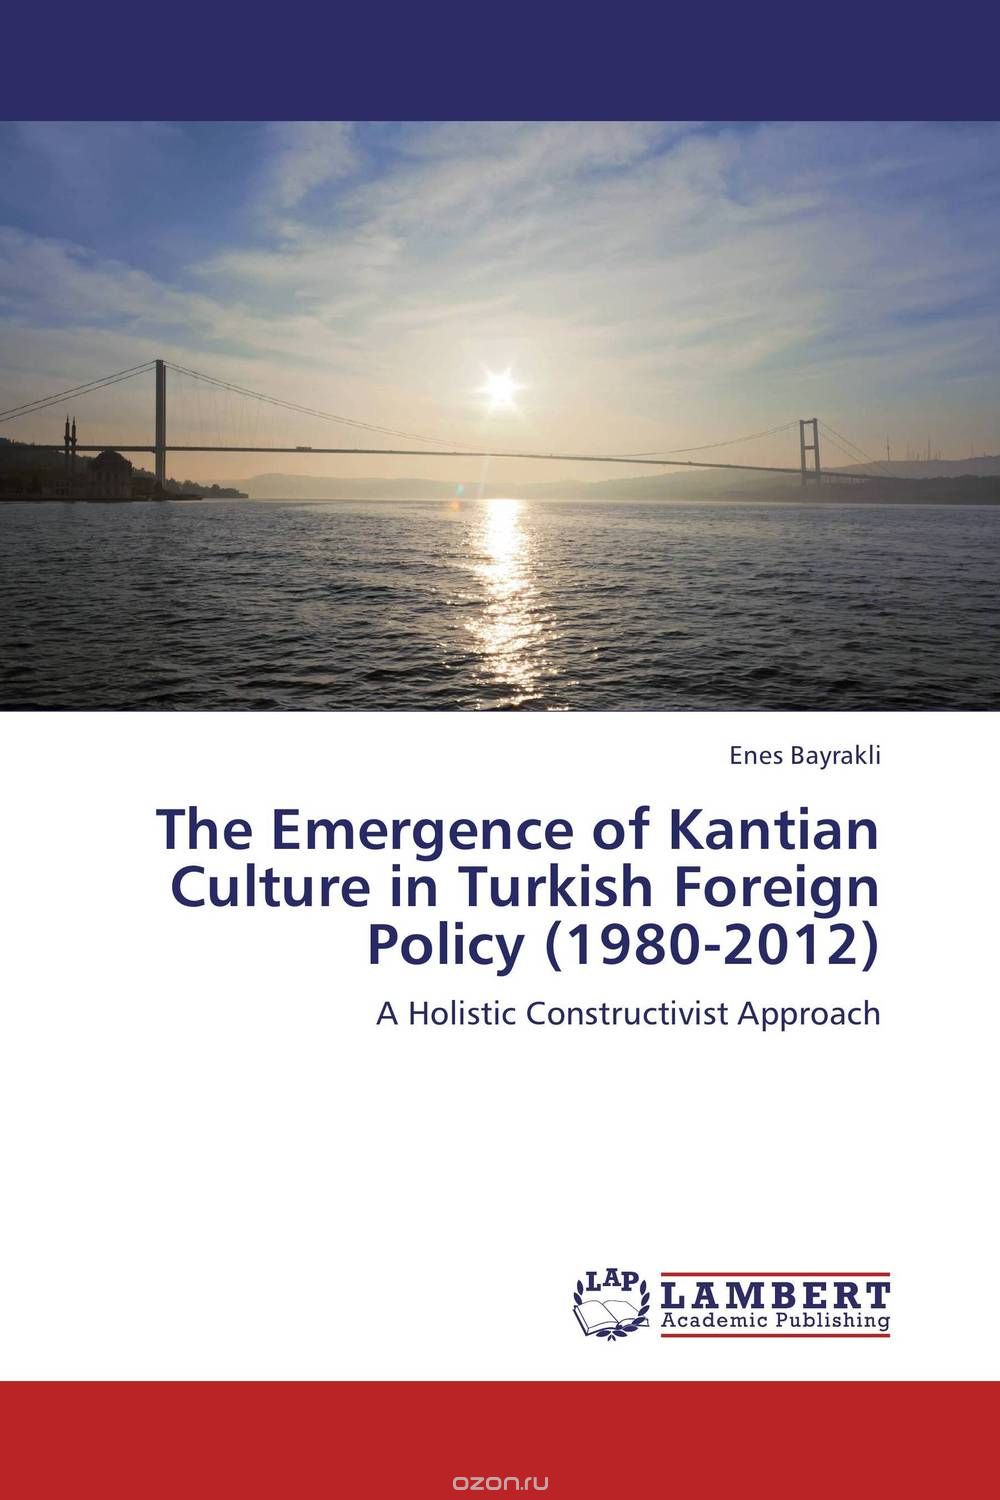 The Emergence of Kantian Culture in Turkish Foreign Policy (1980-2012)